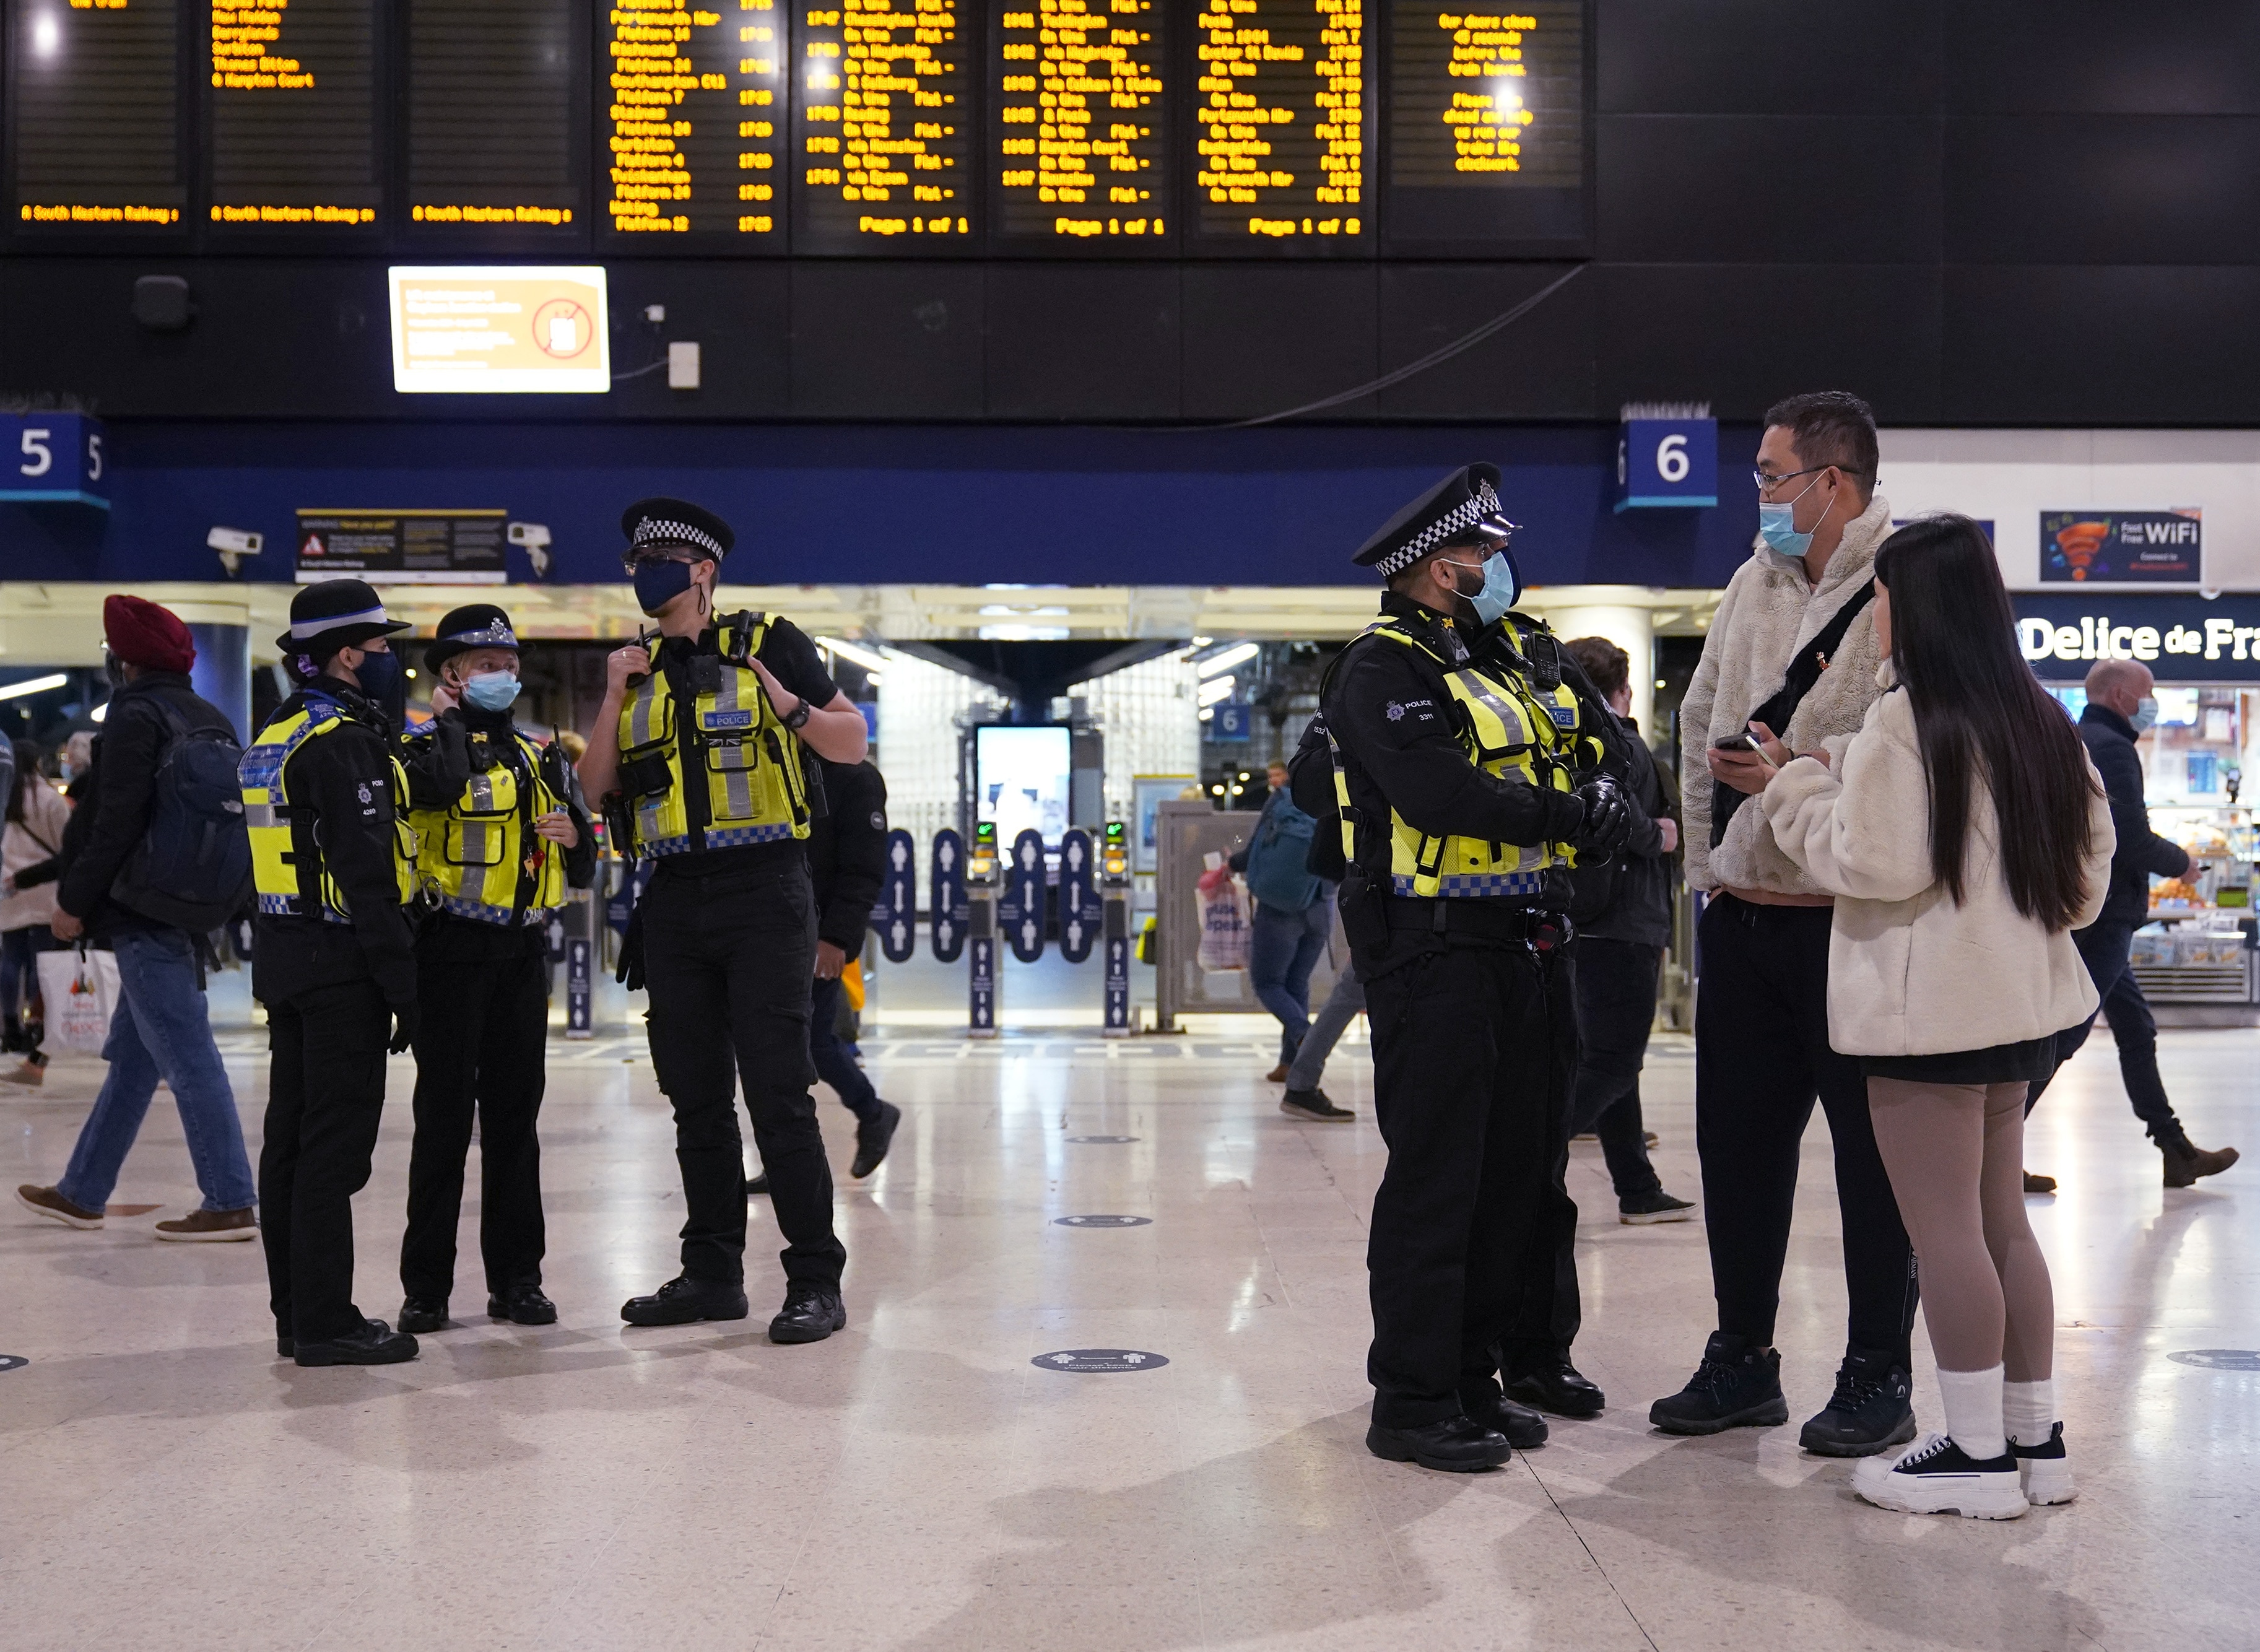 Police on patrol at Waterloo Station, London, in the evening rush hour, where new restrictions have come into force to slow the 